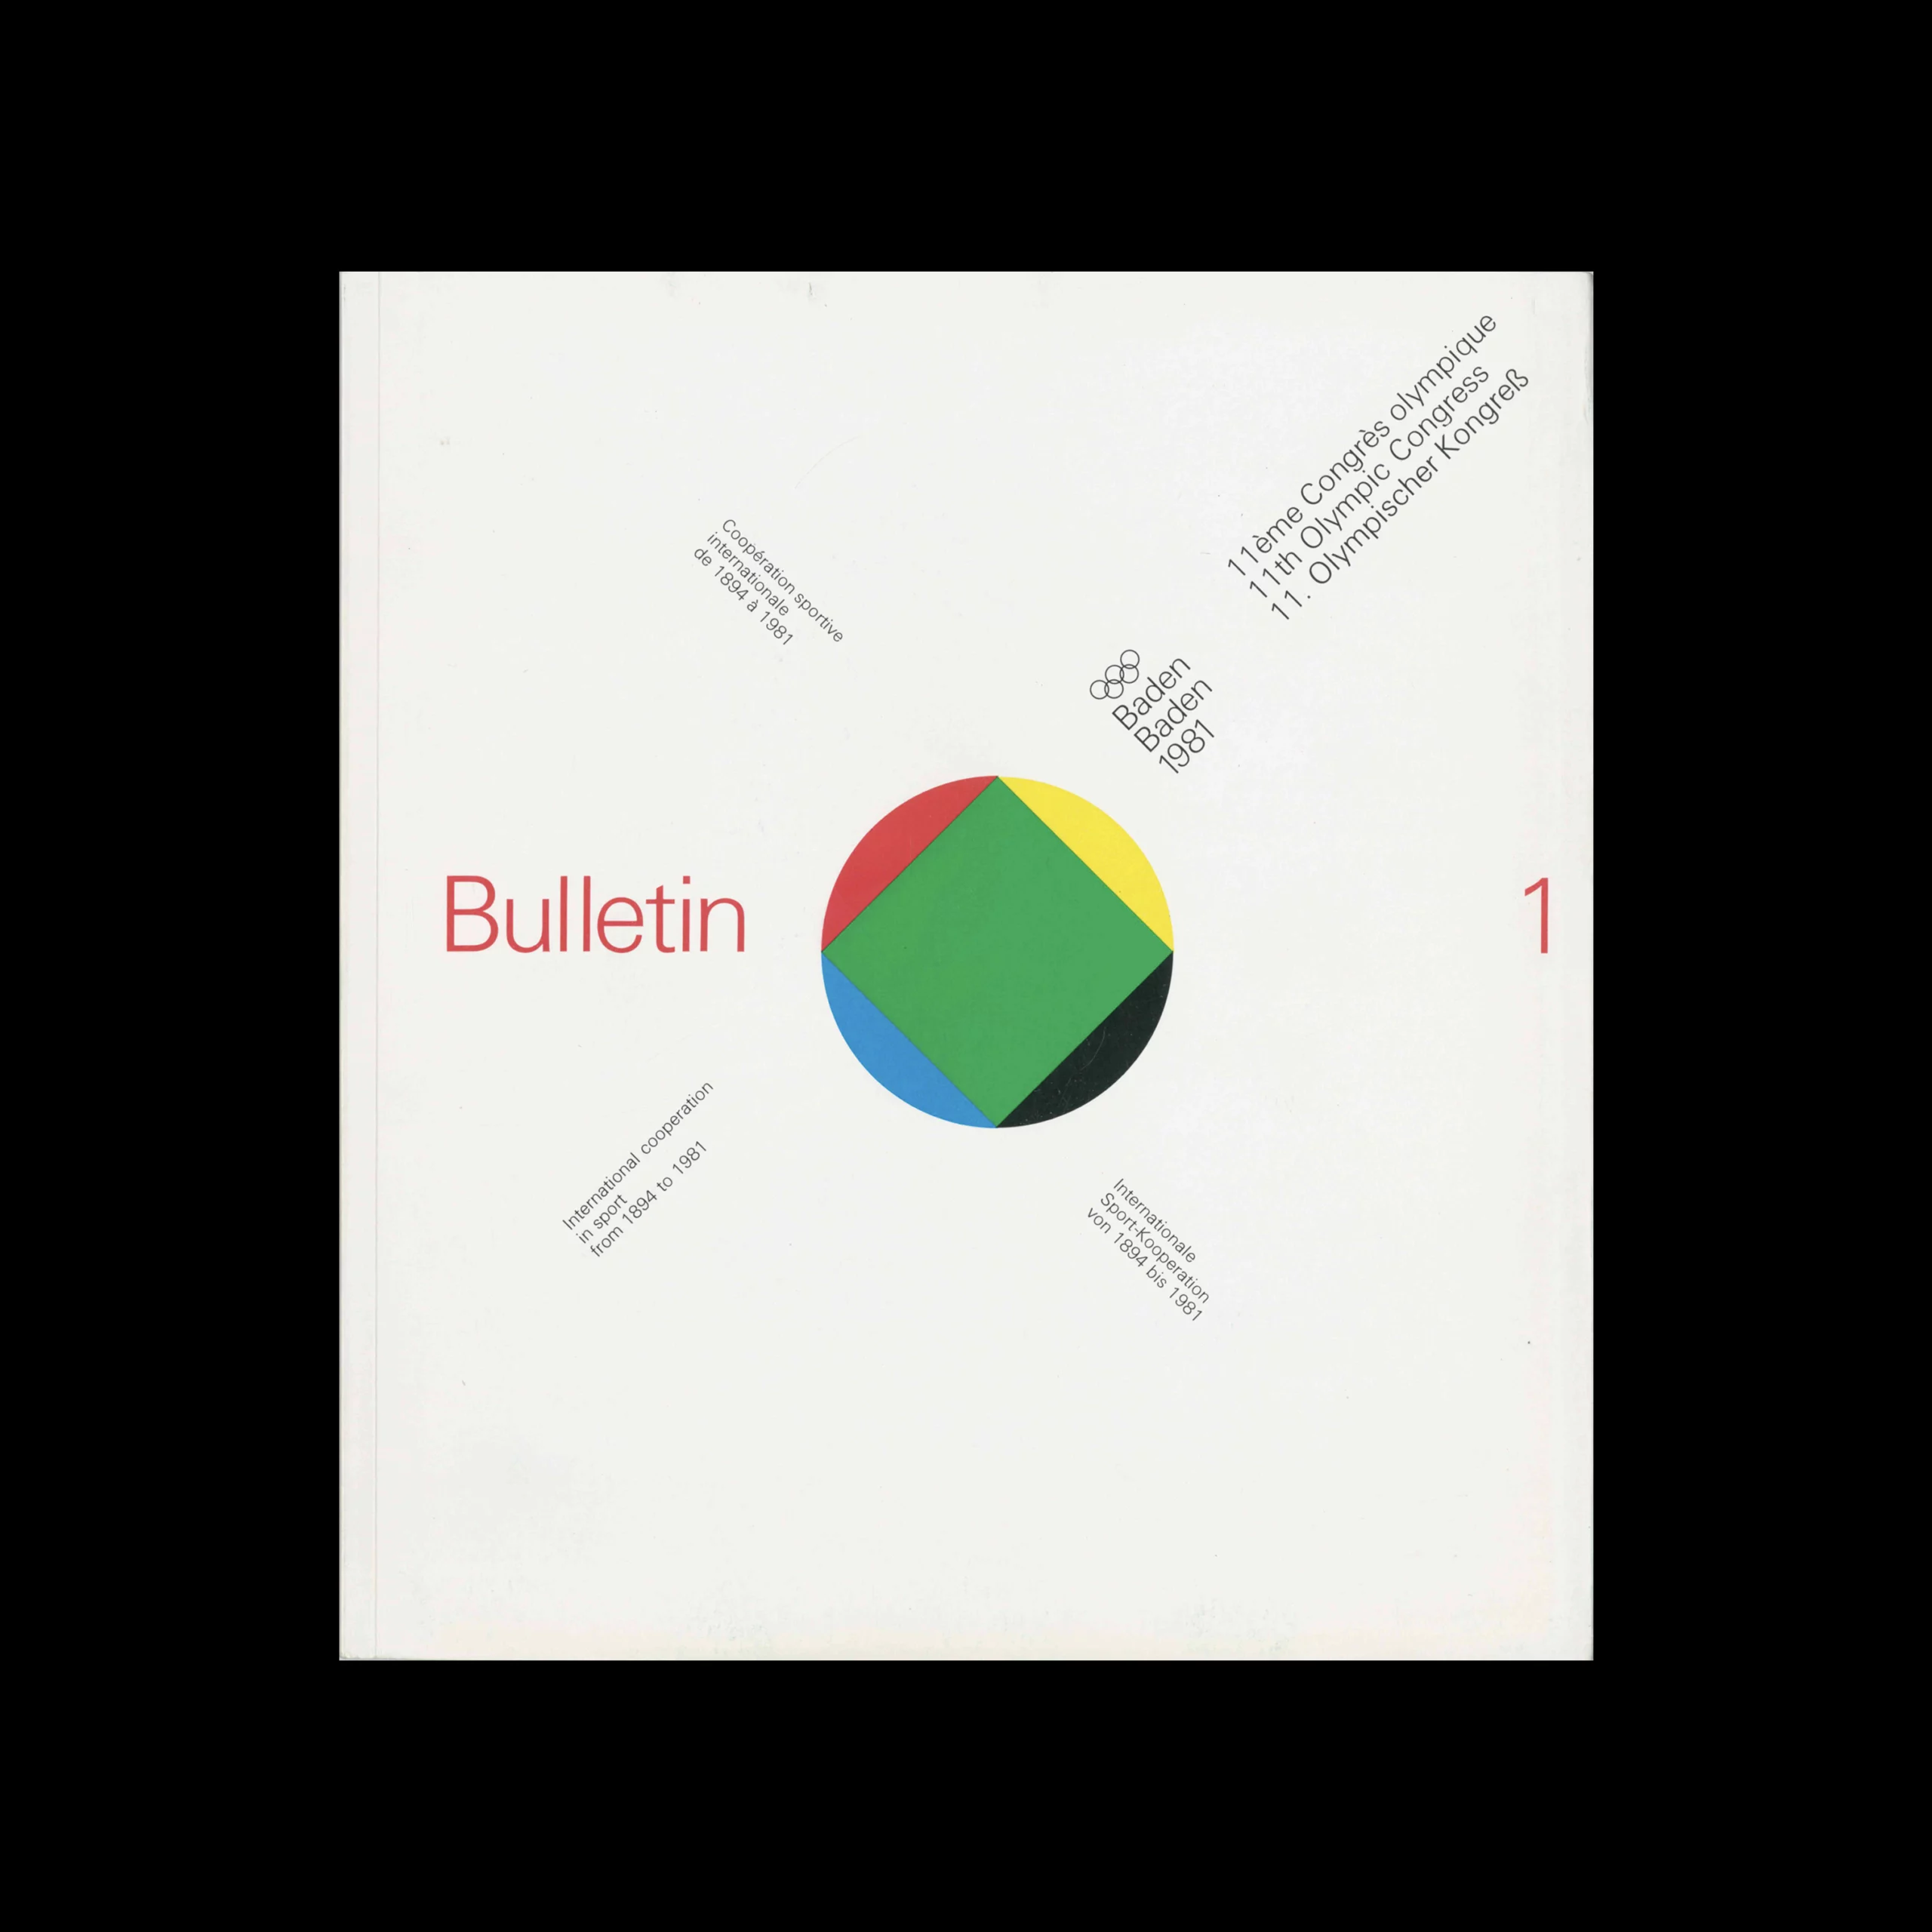 Bulletin 1, 11th Olympic Congress, International Cooperation in Sport, 1981. Designed by Büro Rolf Müller